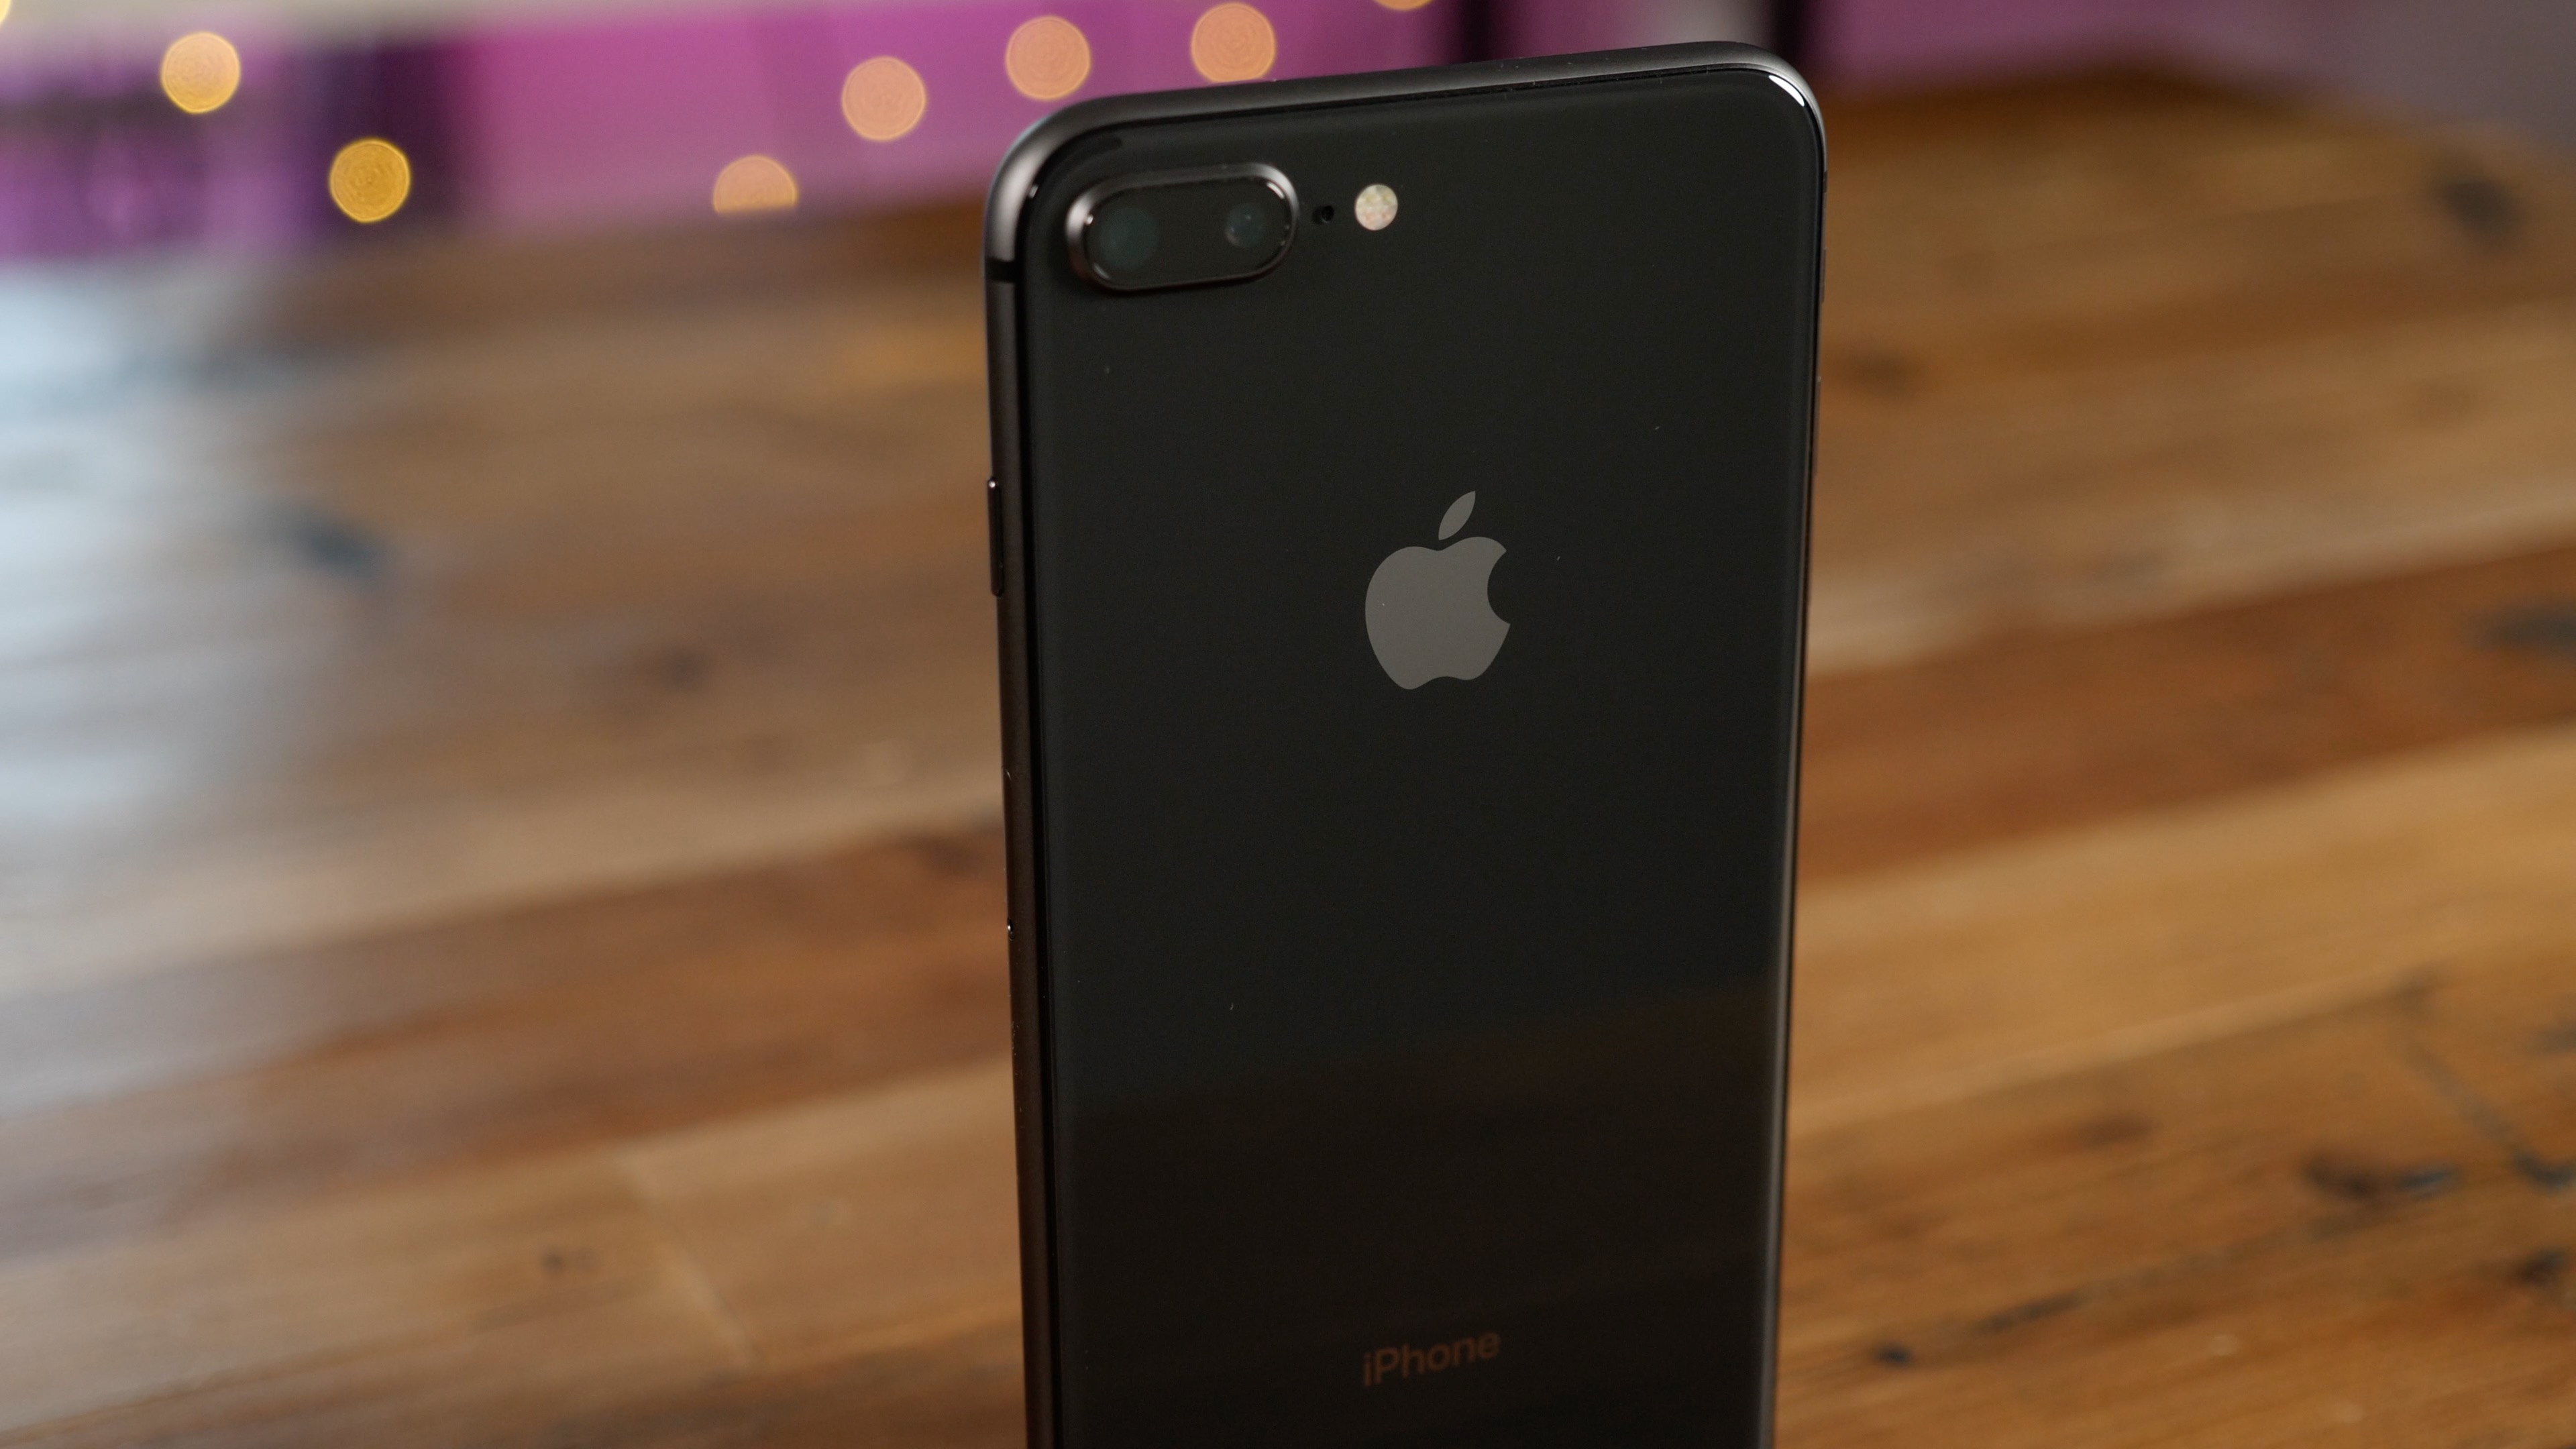 should you buy iphone 8 in 2019